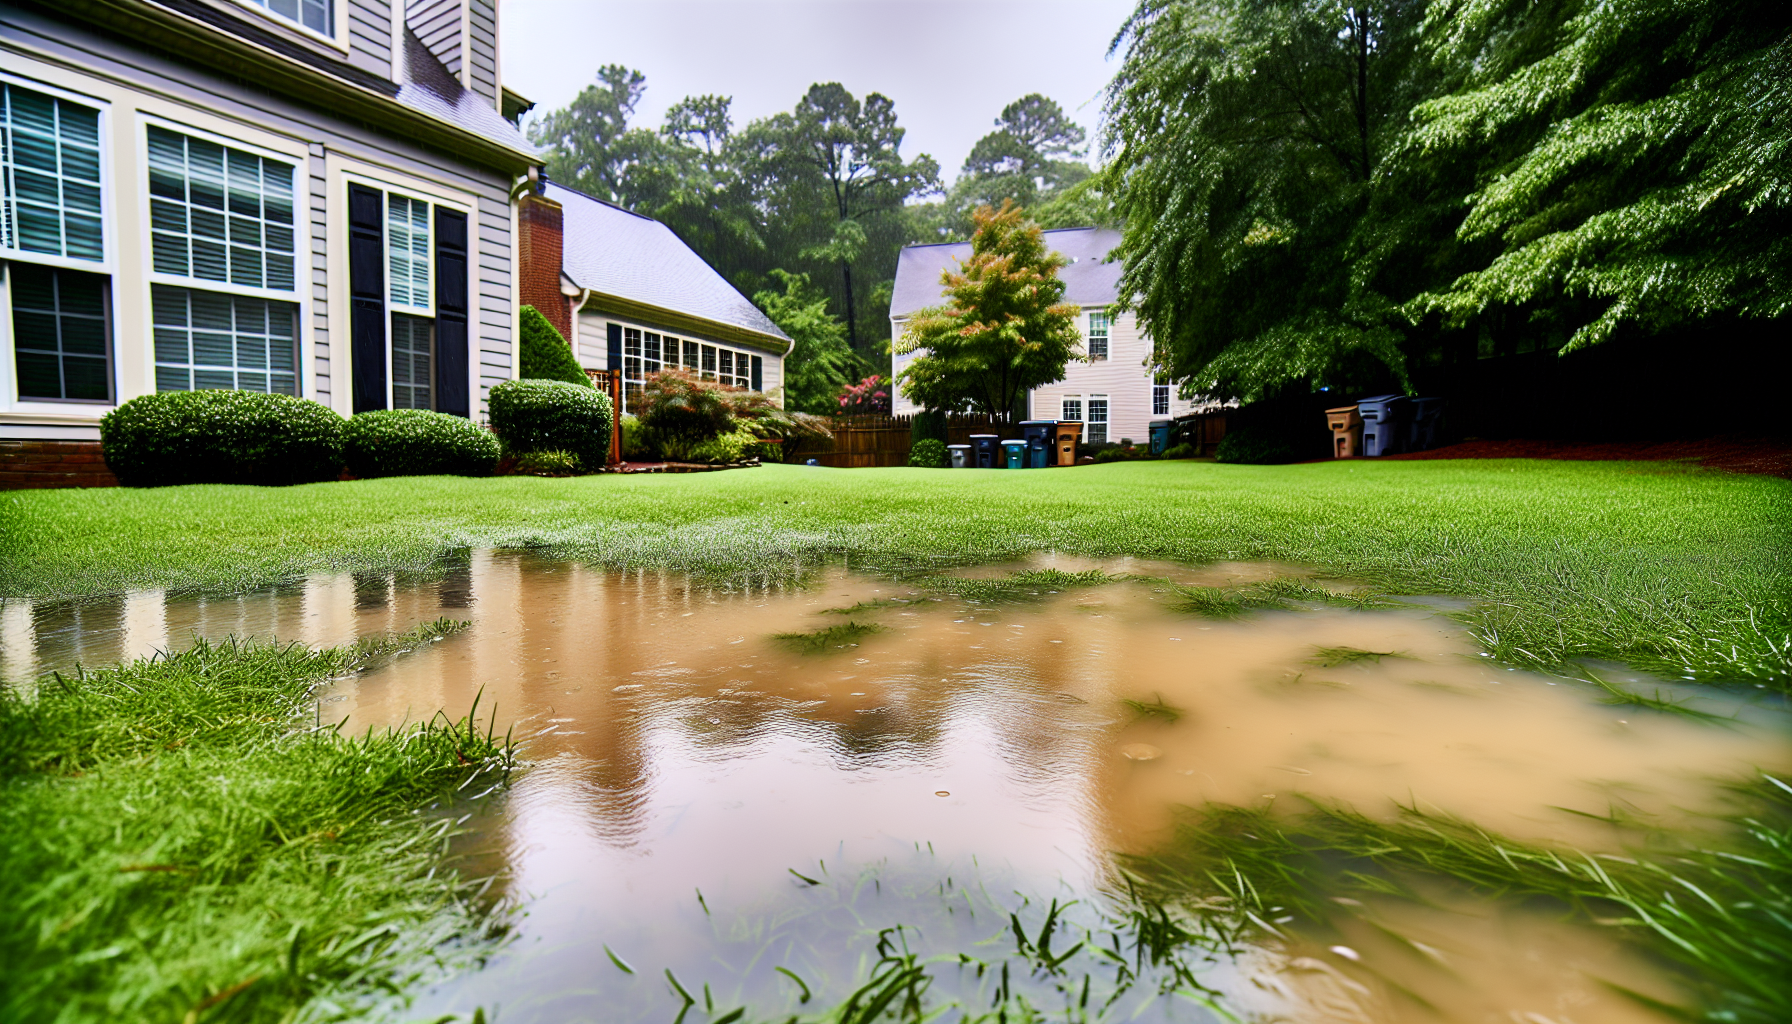 Puddles in yard